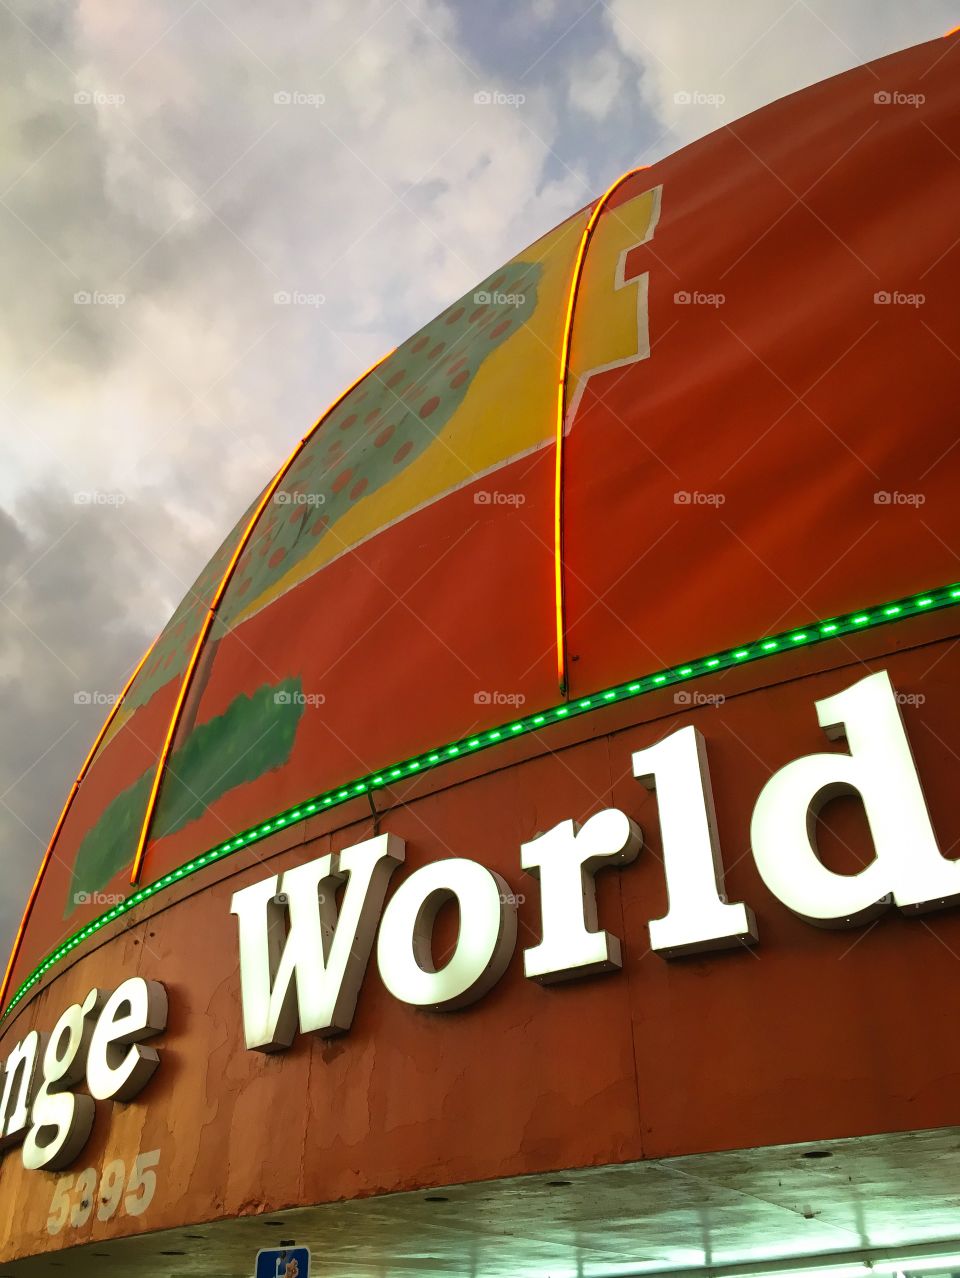 Orange world - a staple in the Orlando area.  You can find all kinds of oranges there, along with other tourist items. 